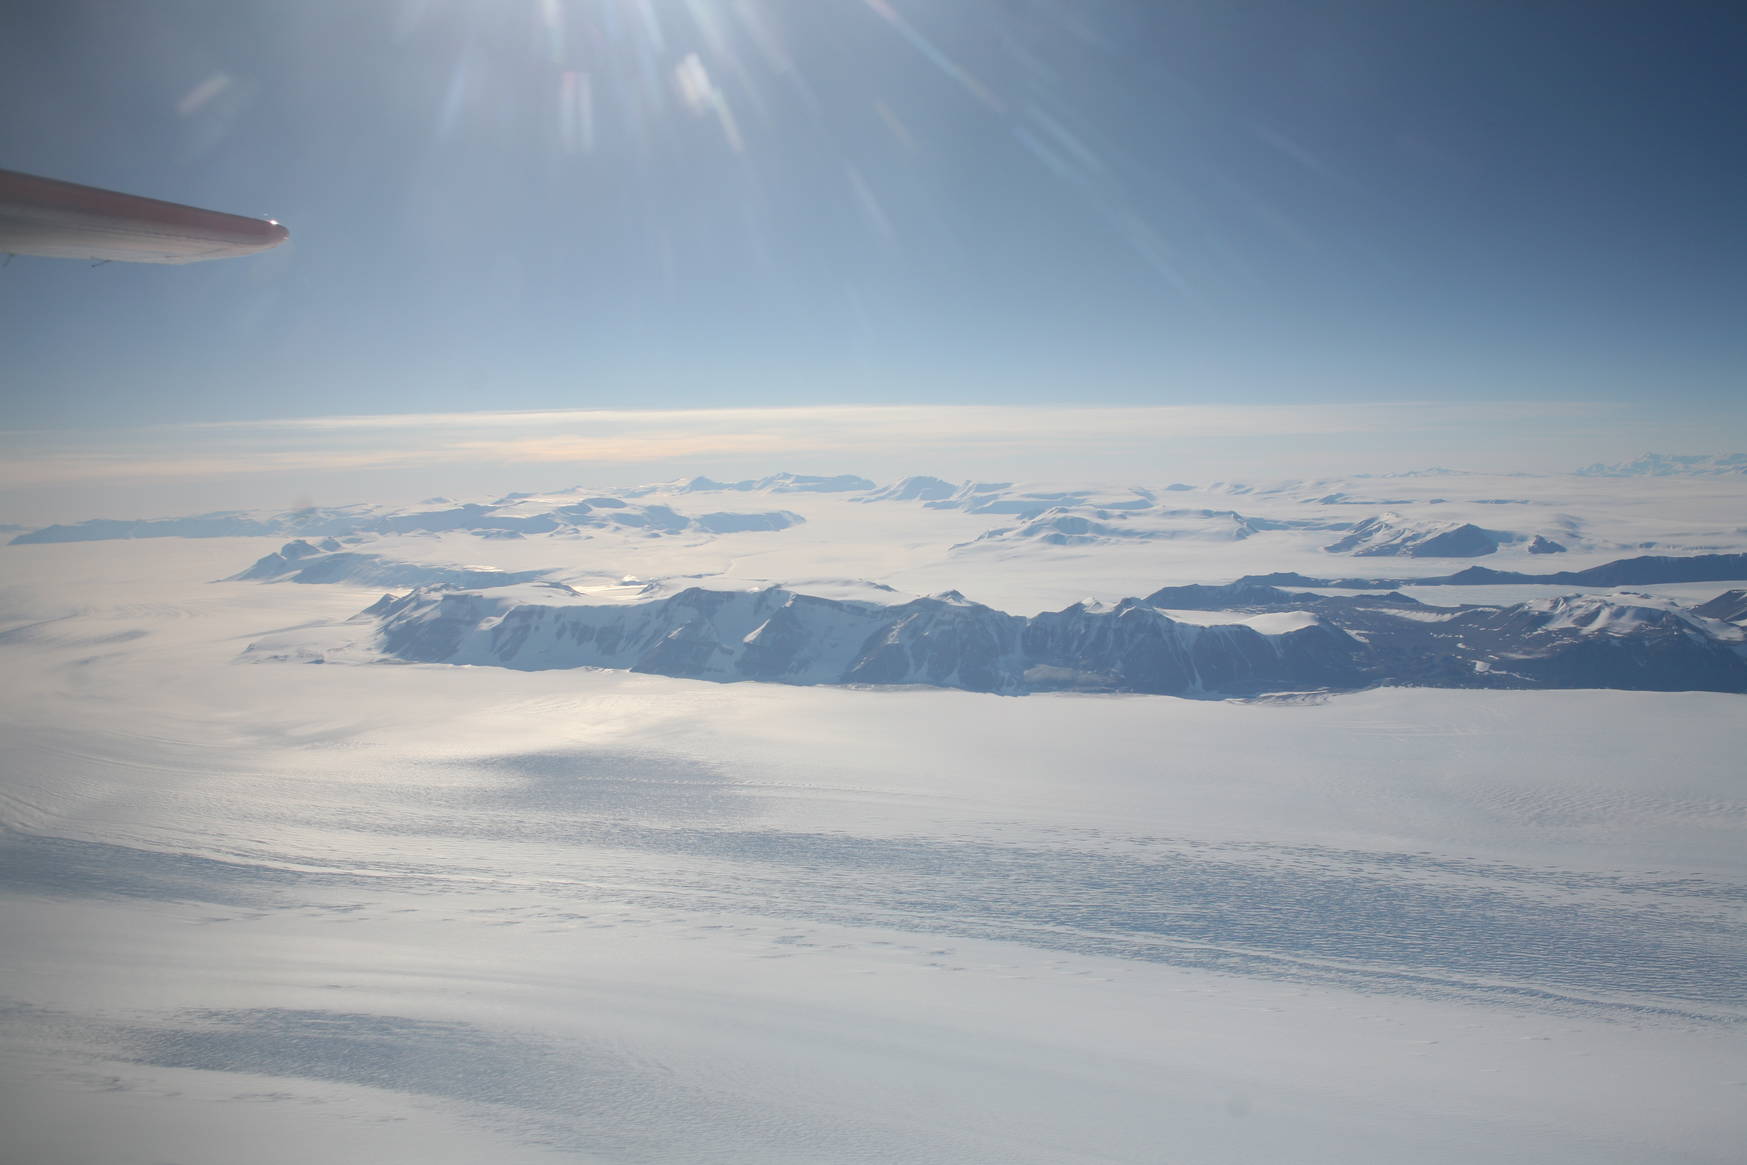 Trans-Antarctic mountains seen from the airplane.